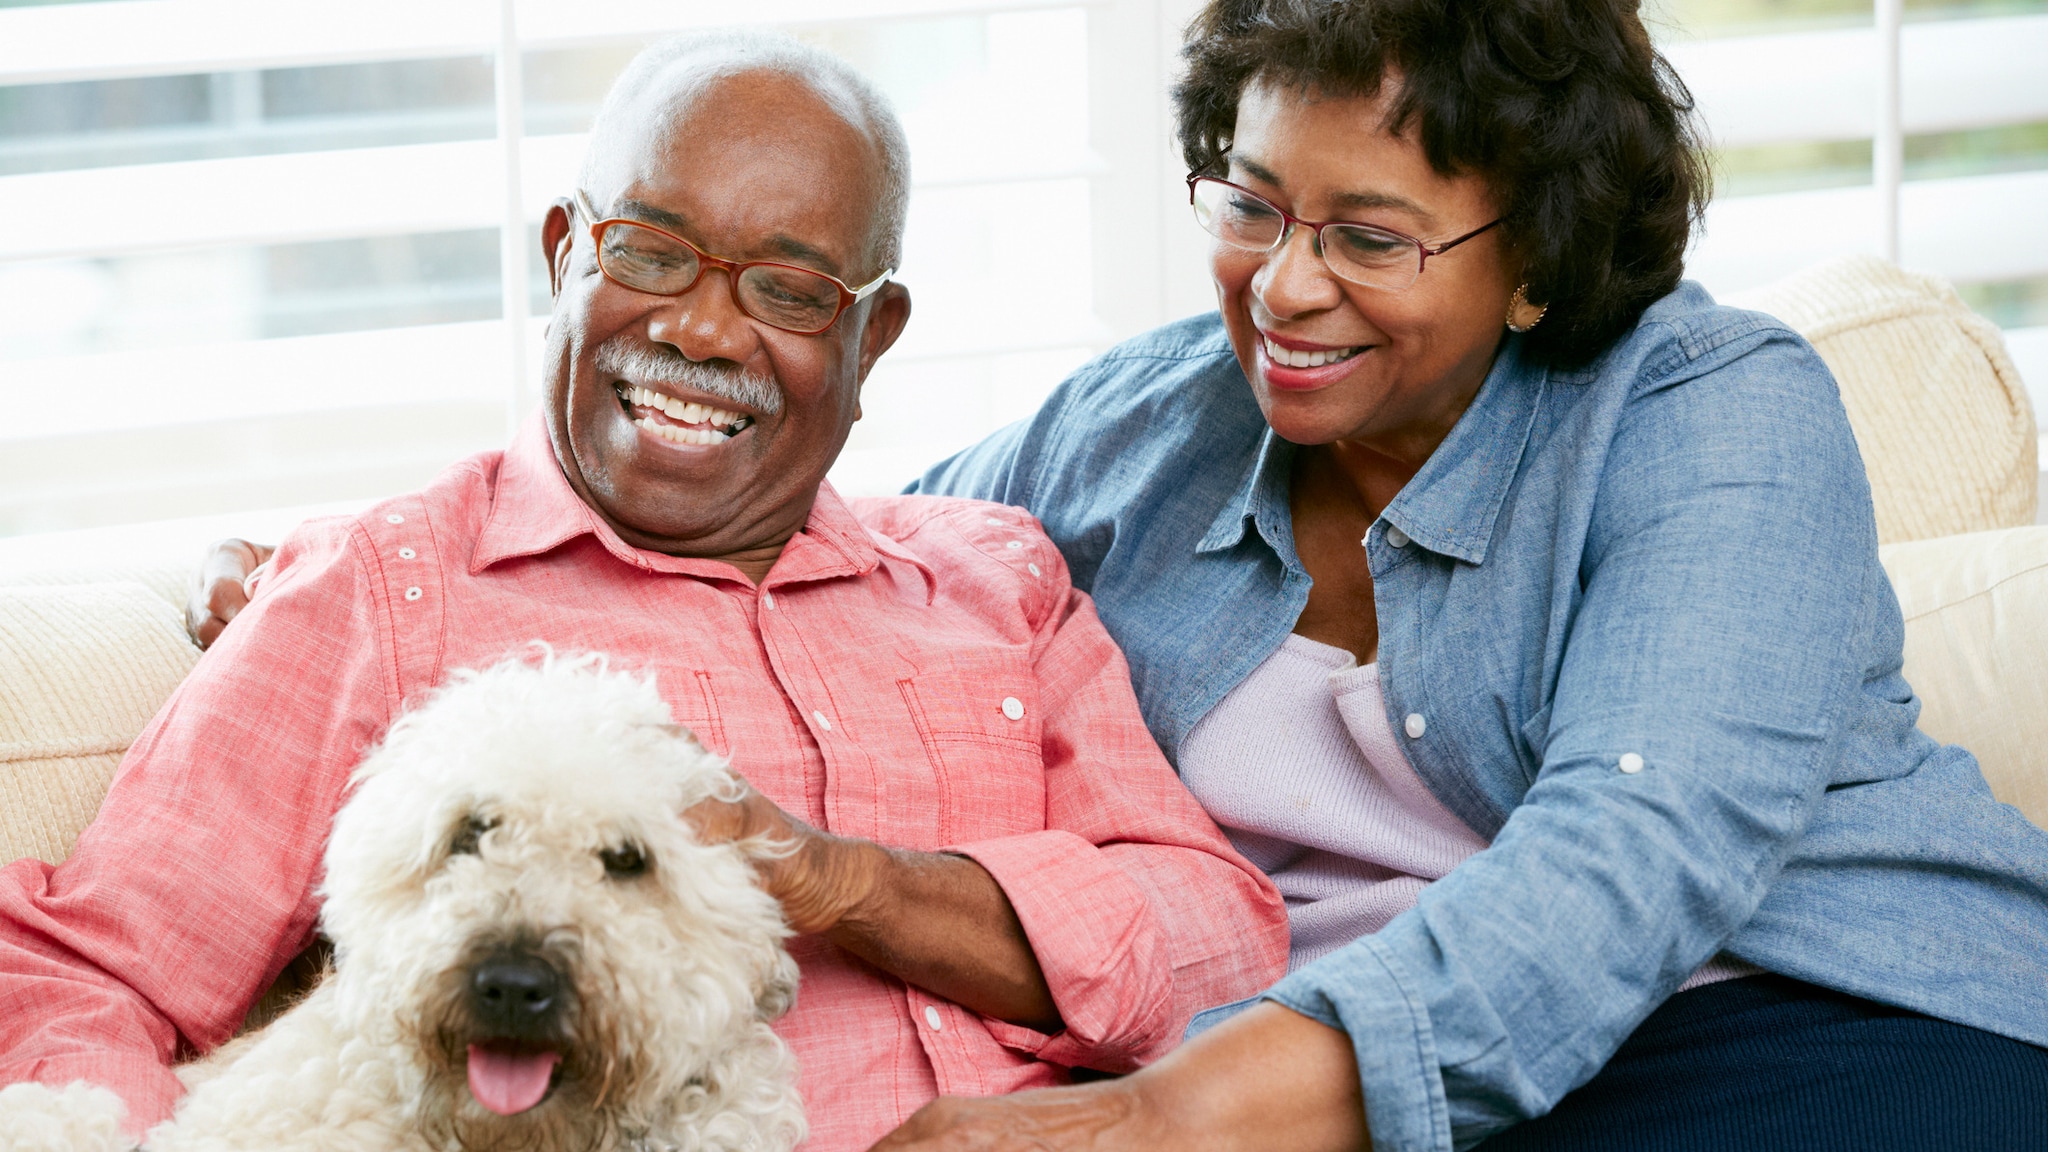 An older couple smiles at a white dog on a couch